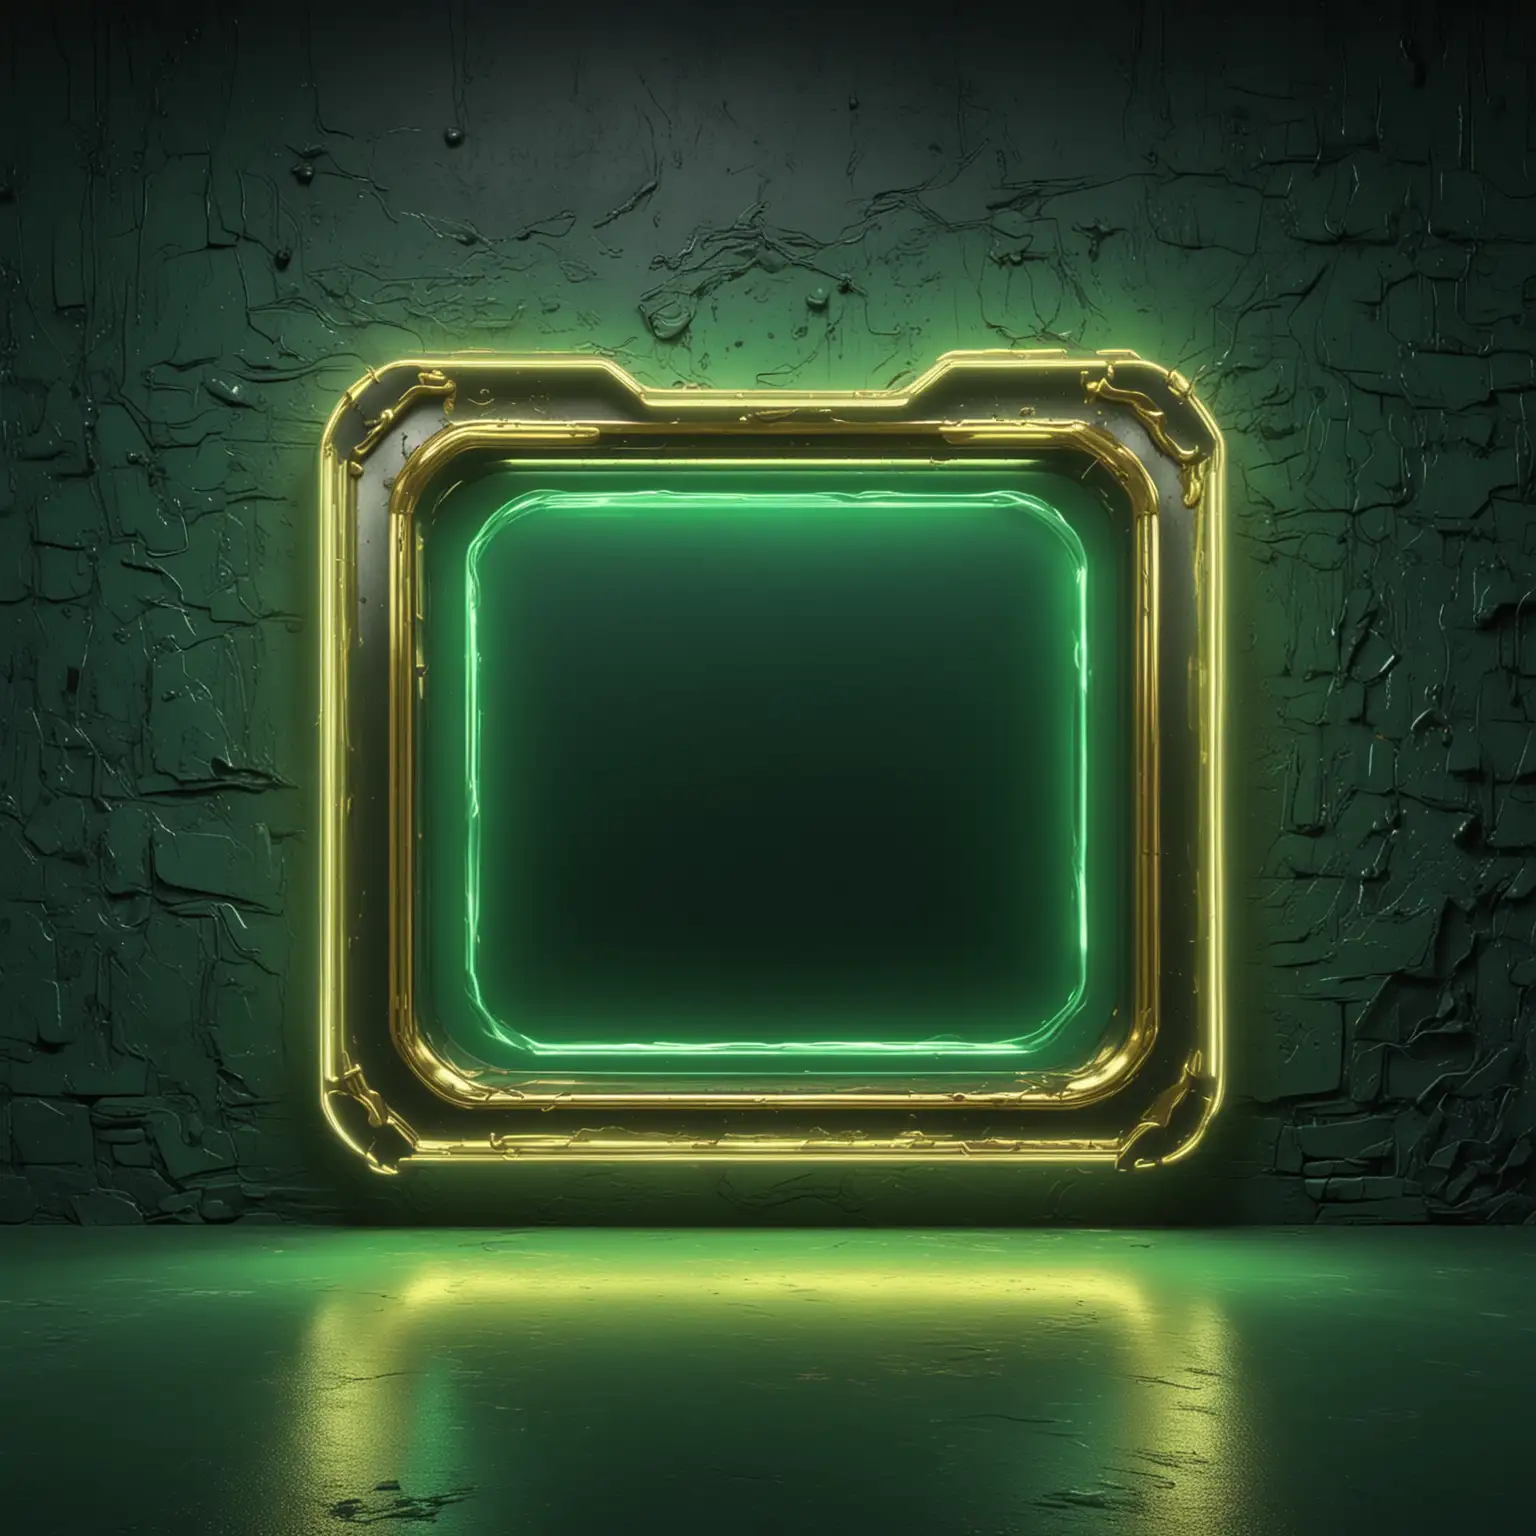 Emerald Green Neon Light Background with Gold Metal Accents Cinematic Lighting Art